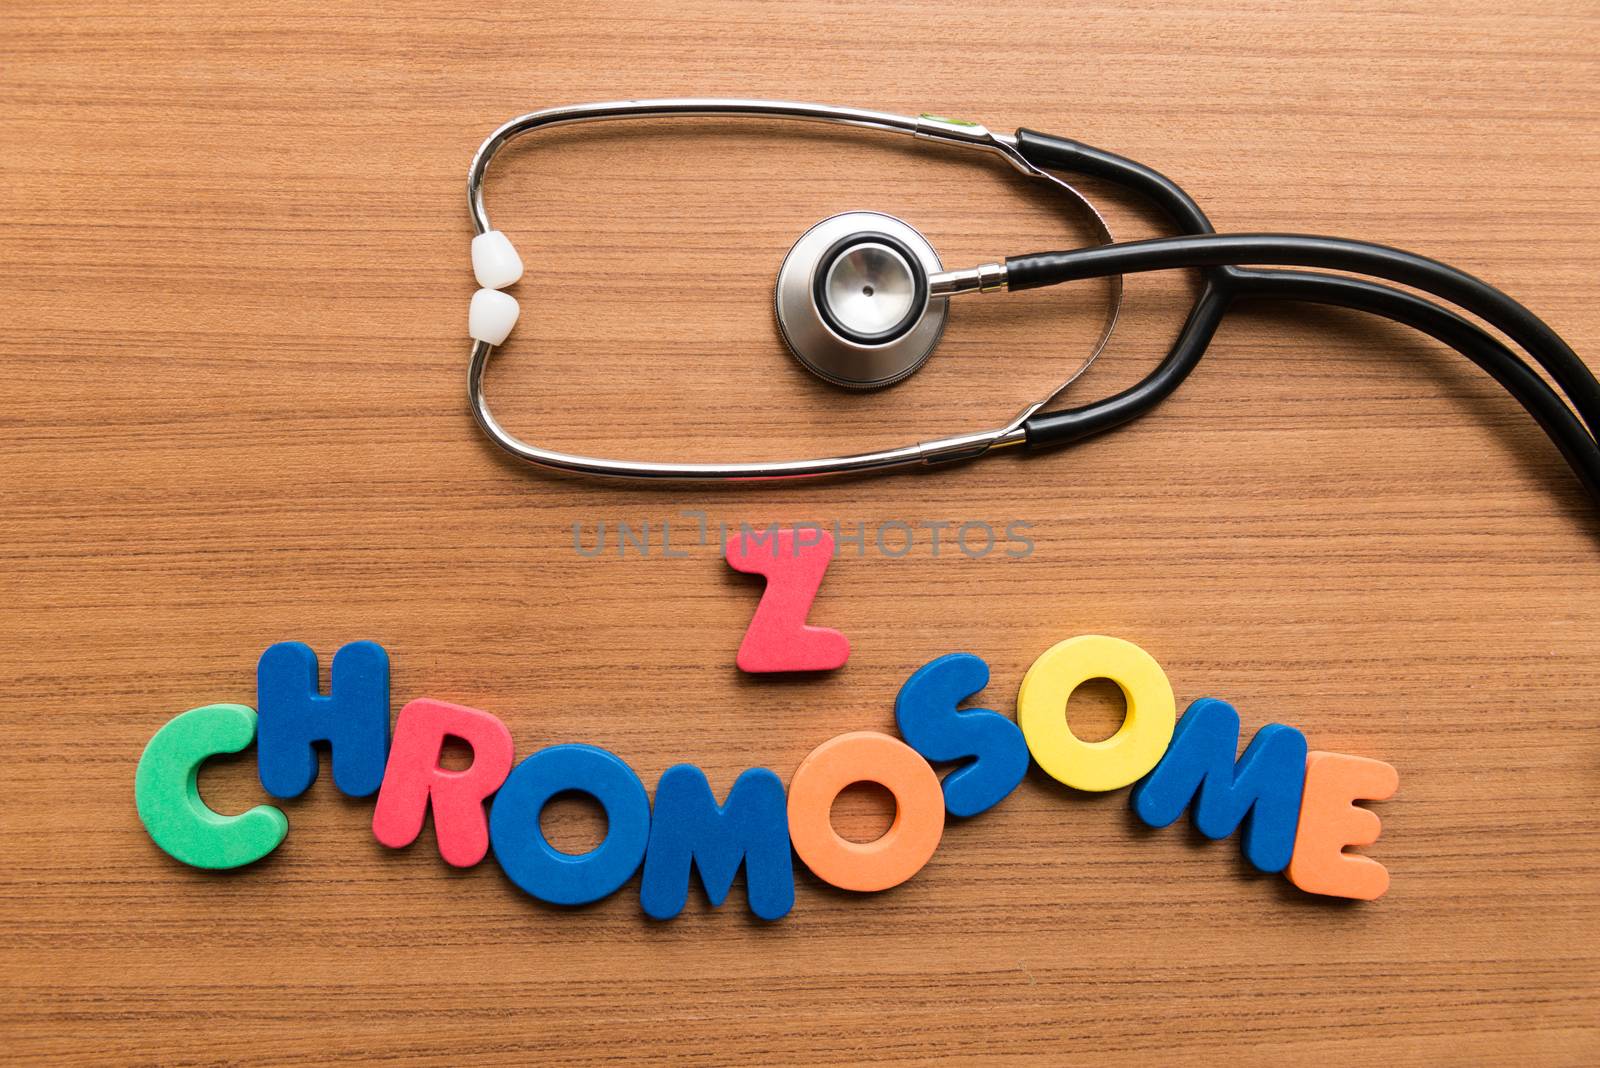 z chromosome colorful word with stethoscope on wooden background